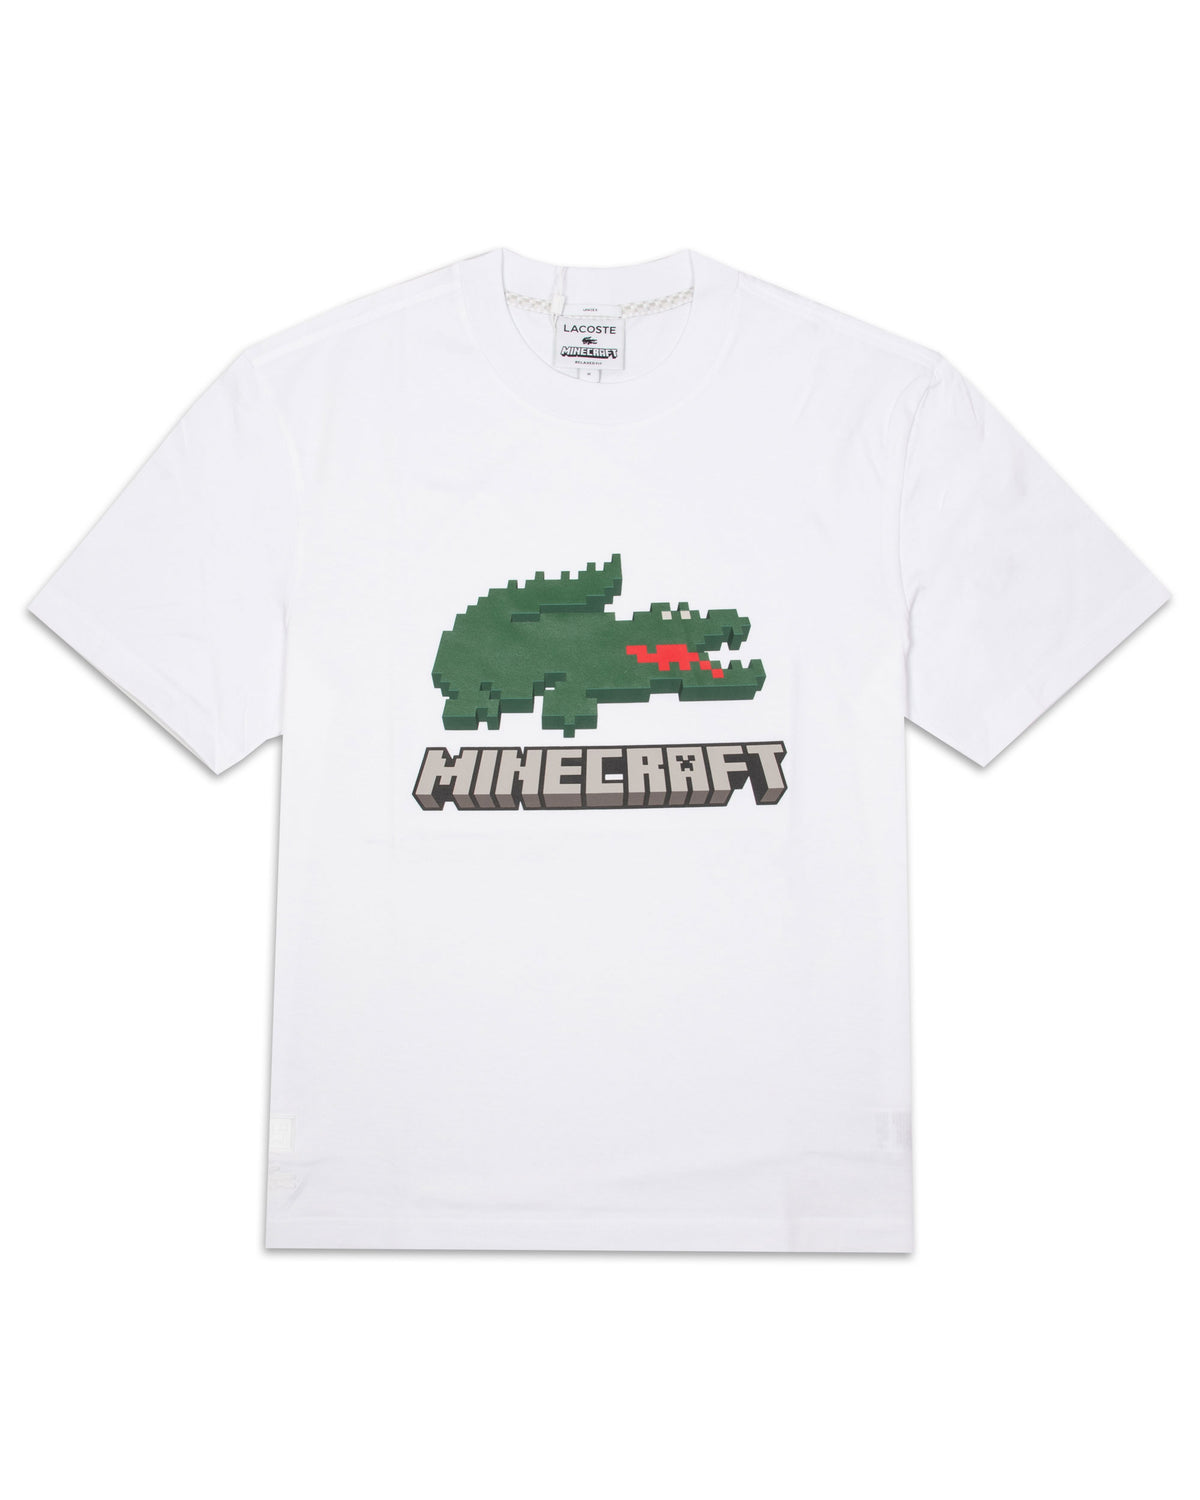 Lacoste x Minecraft T-Shirt White TH5038-001